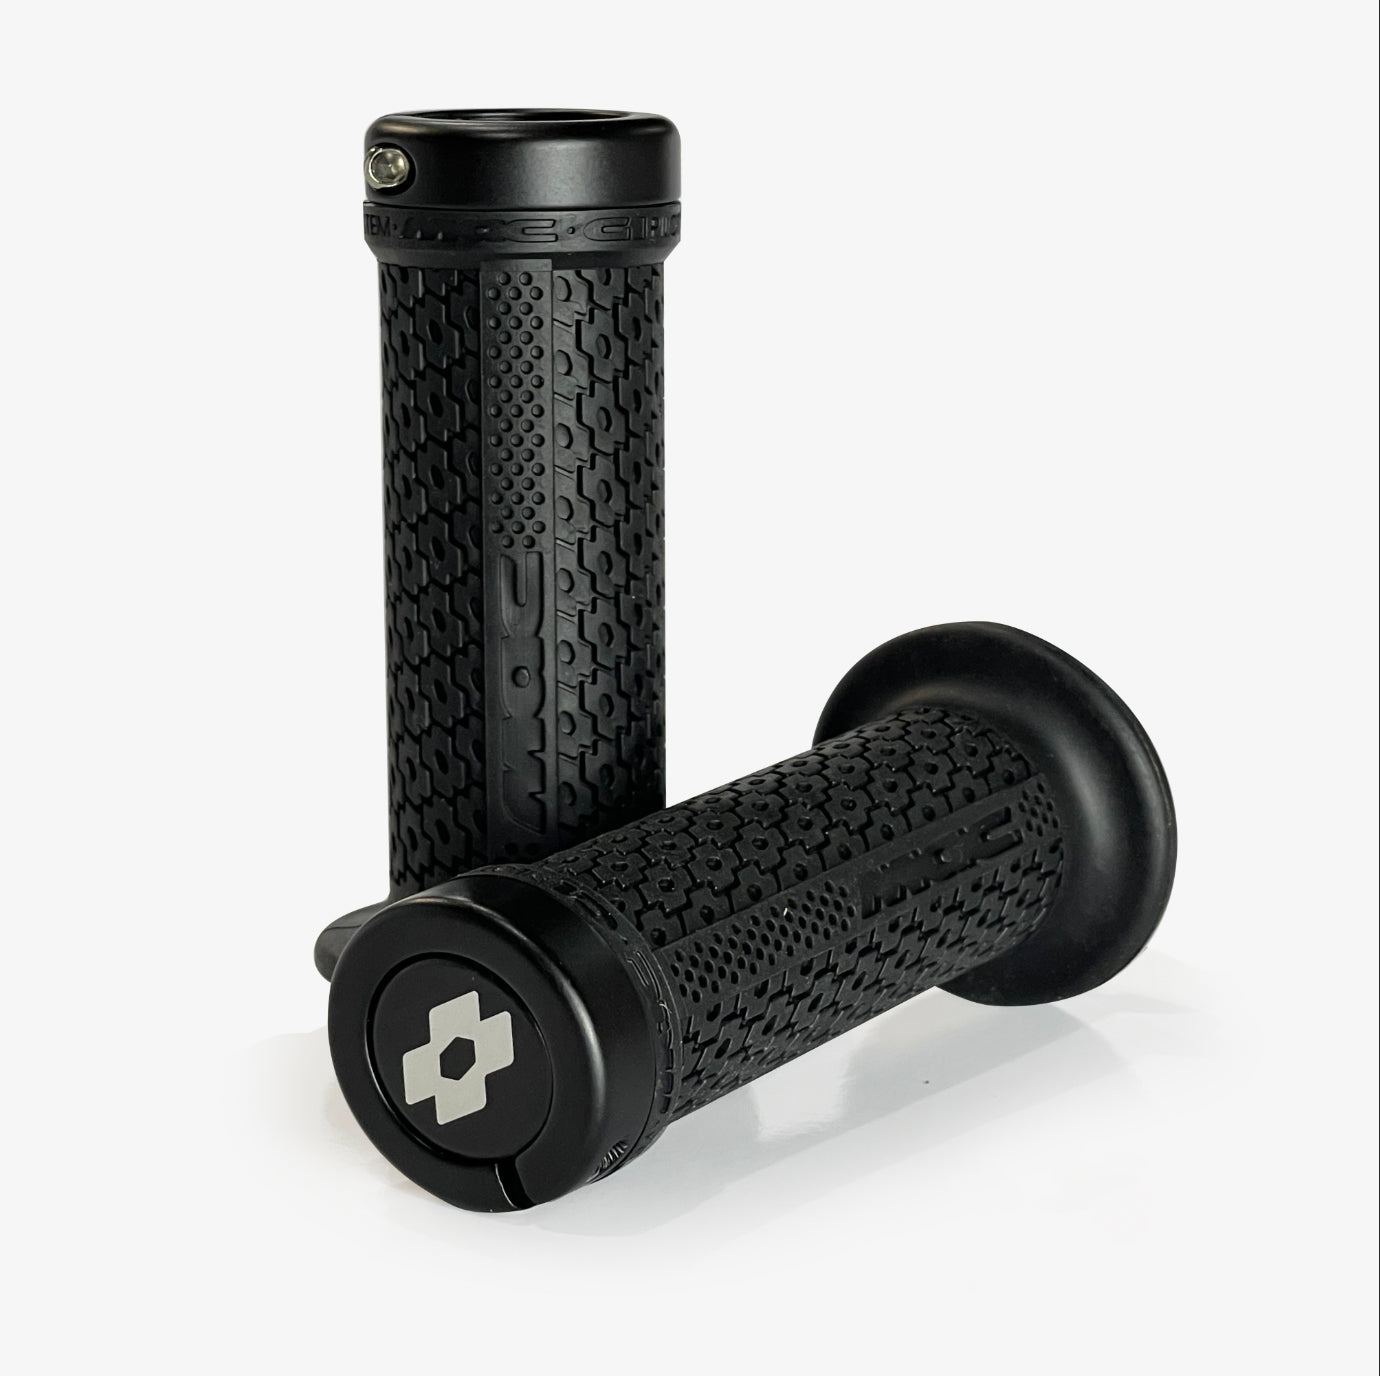 Two black, durable MAC G1 Mini Race Grip Flanged handlebar grips for a bicycle, displayed upright and horizontally on a white background.